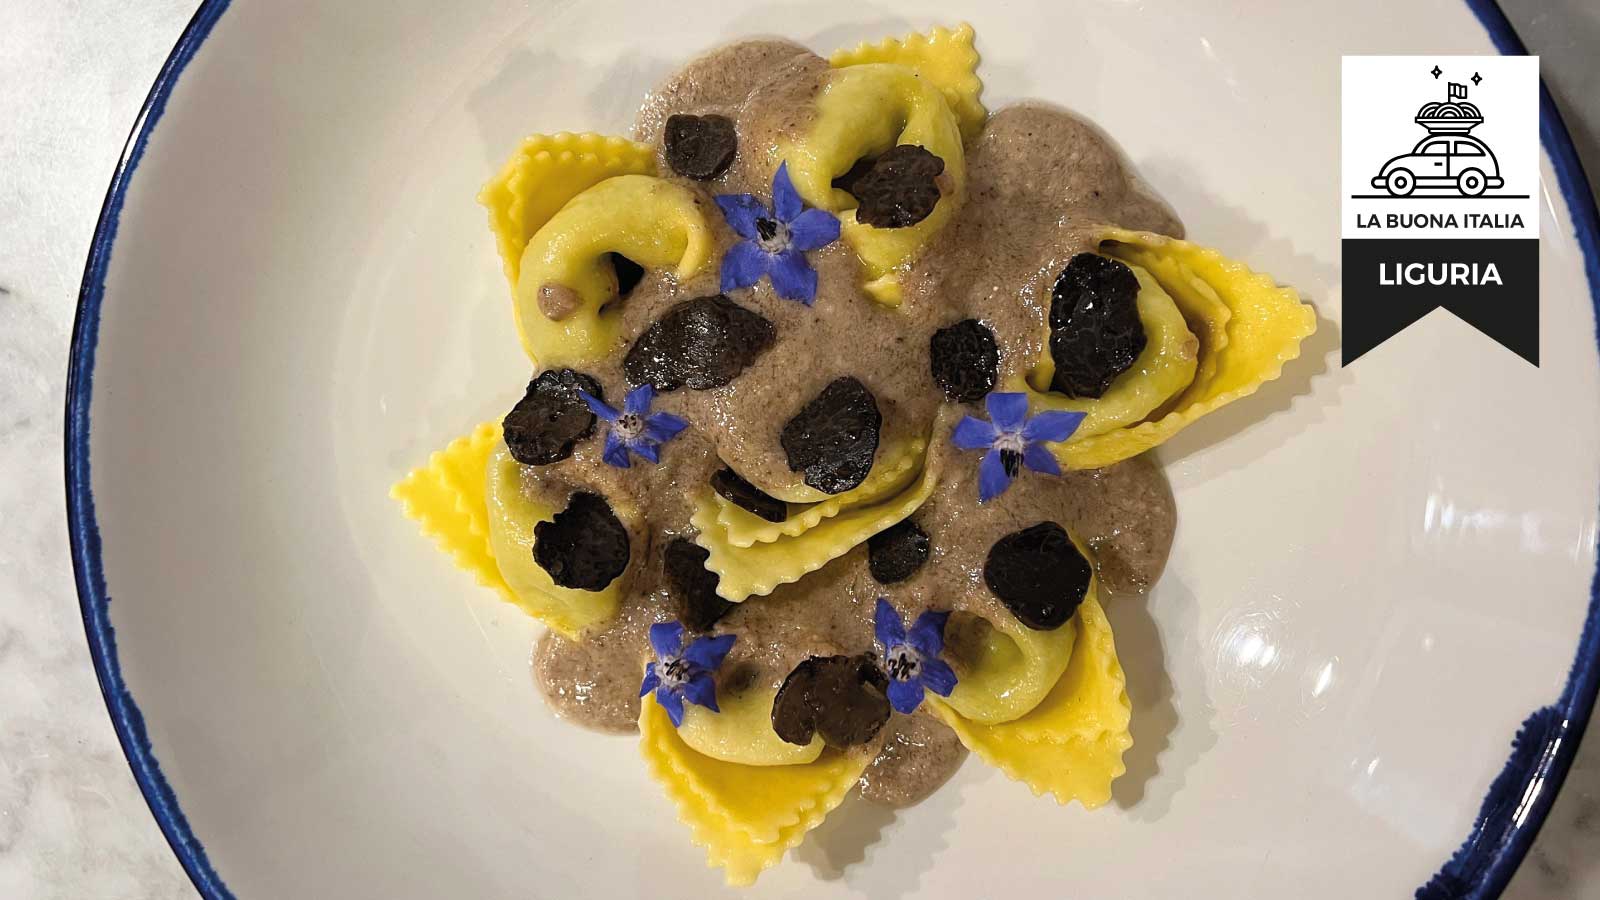 Liguria – Pansoti In Truffle And Nut Sauce